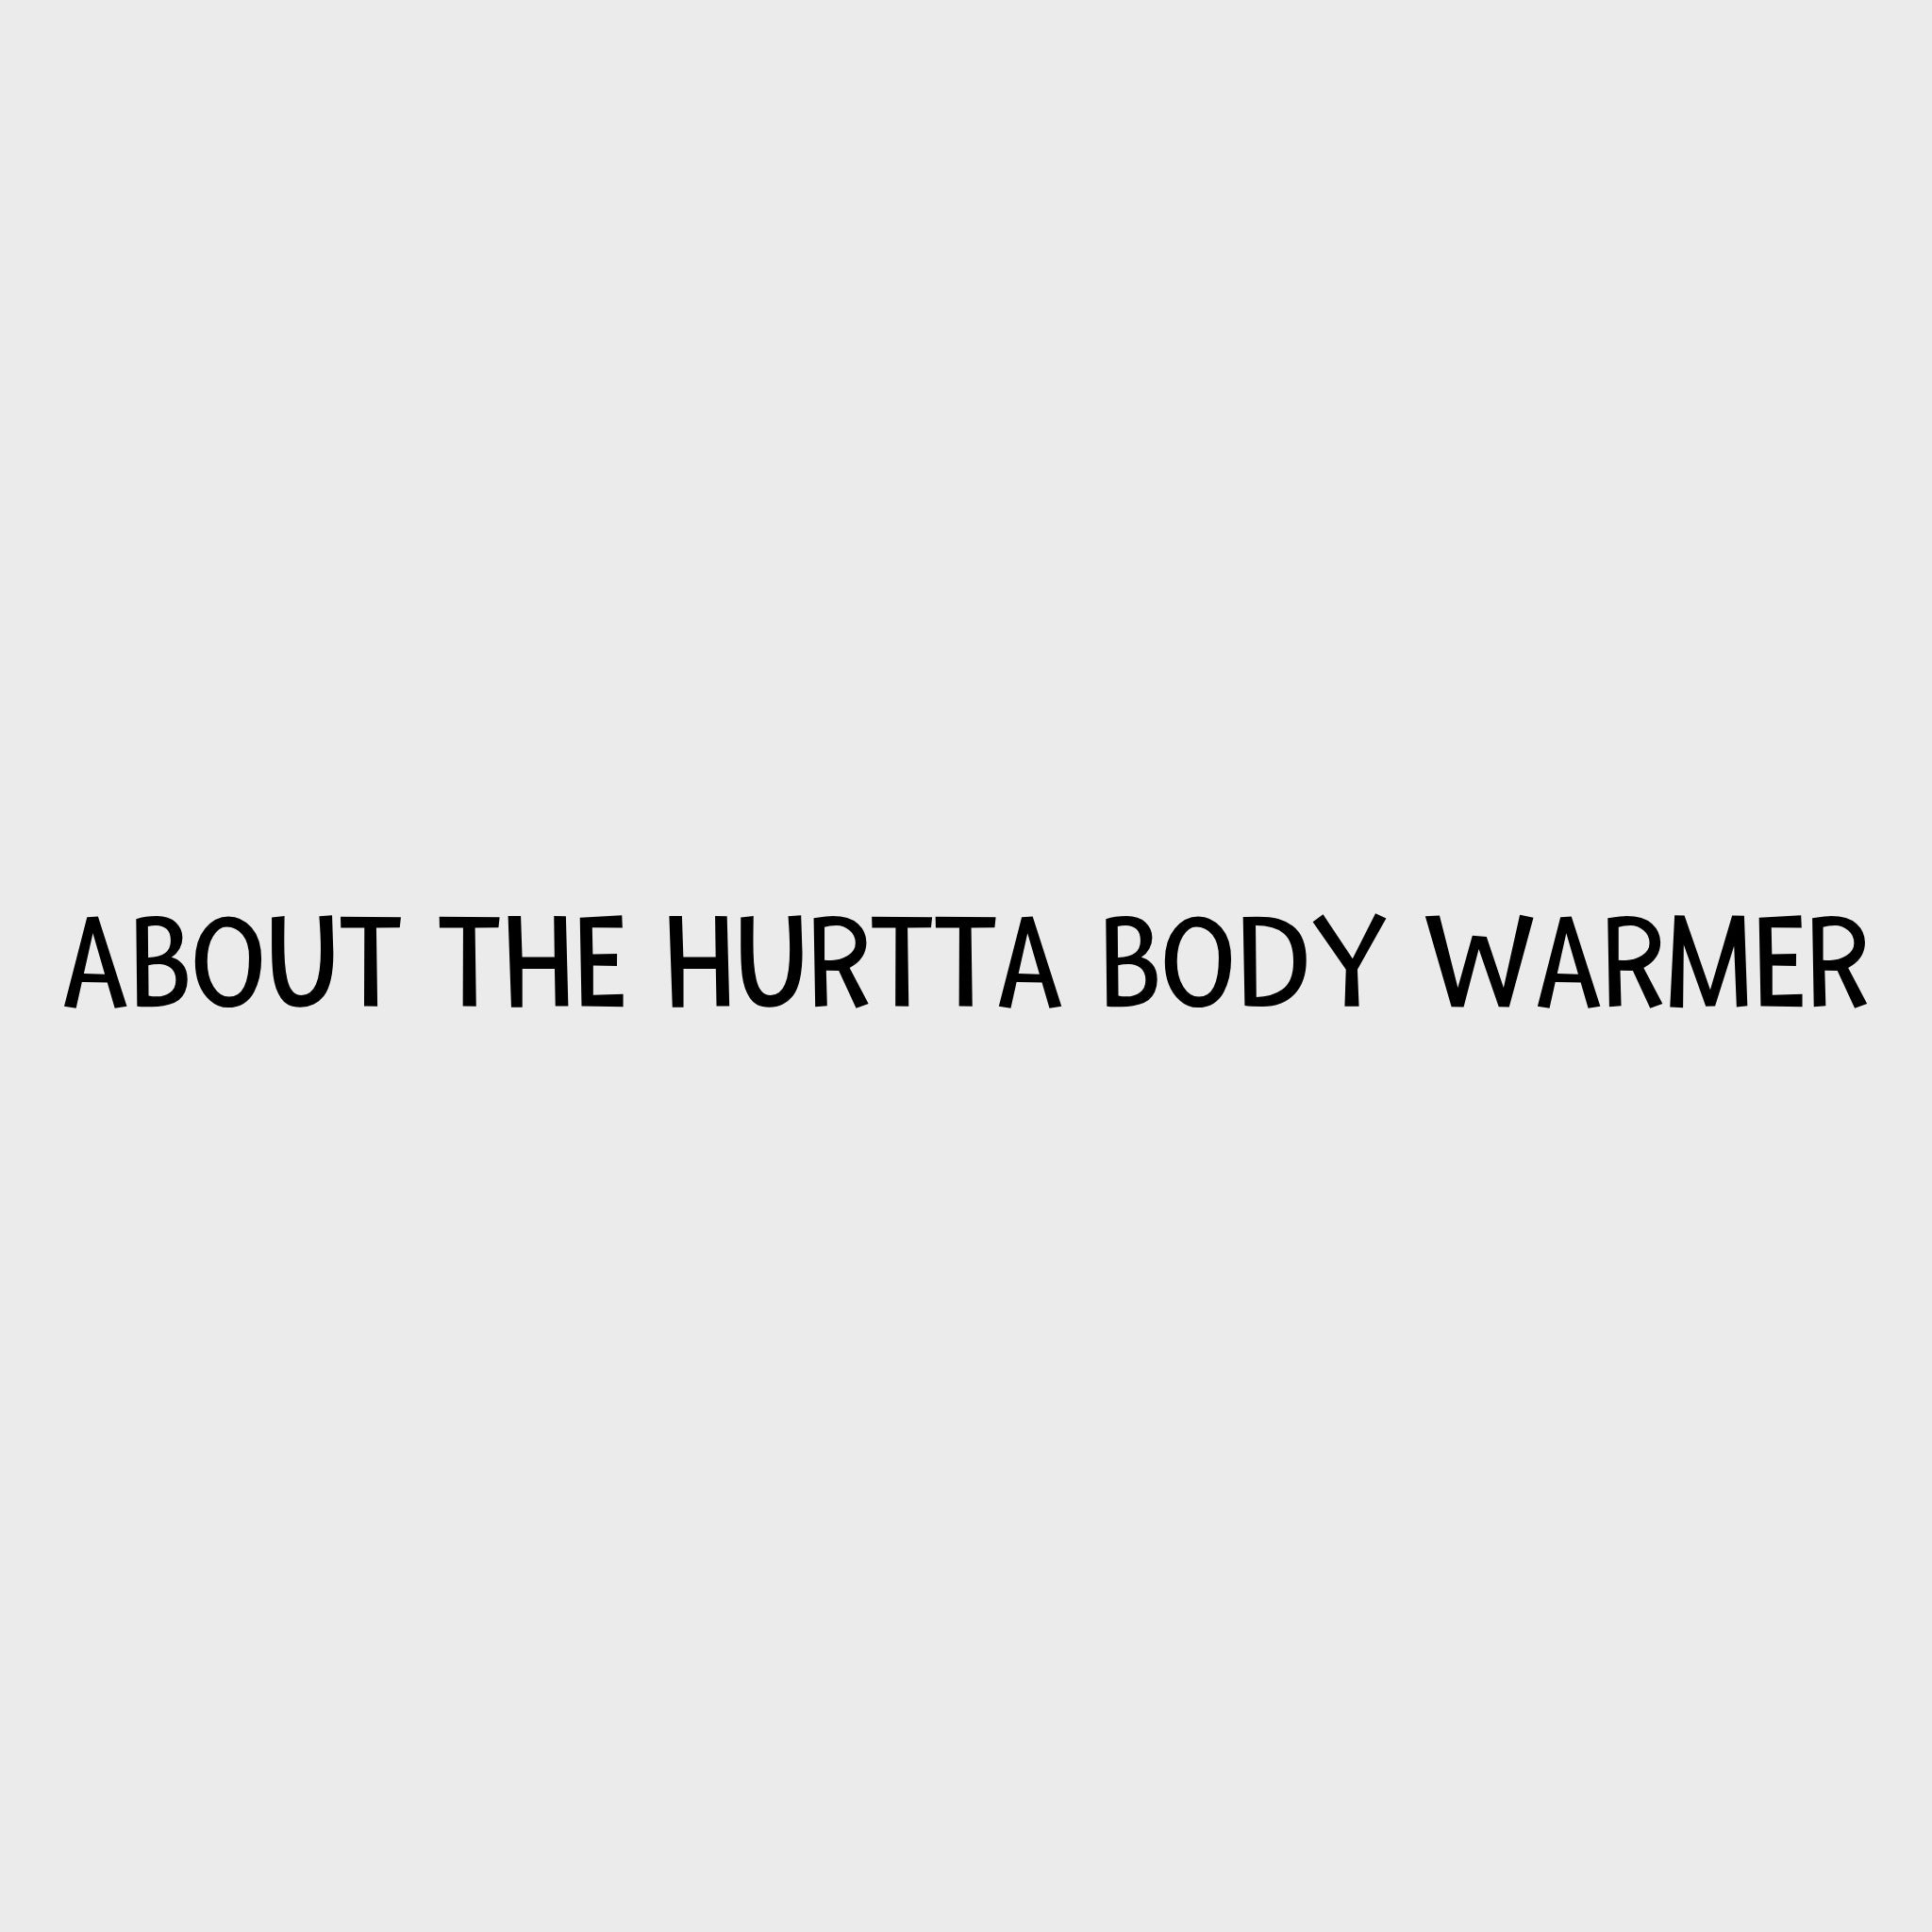 Video - About the Hurtta Body Warmer